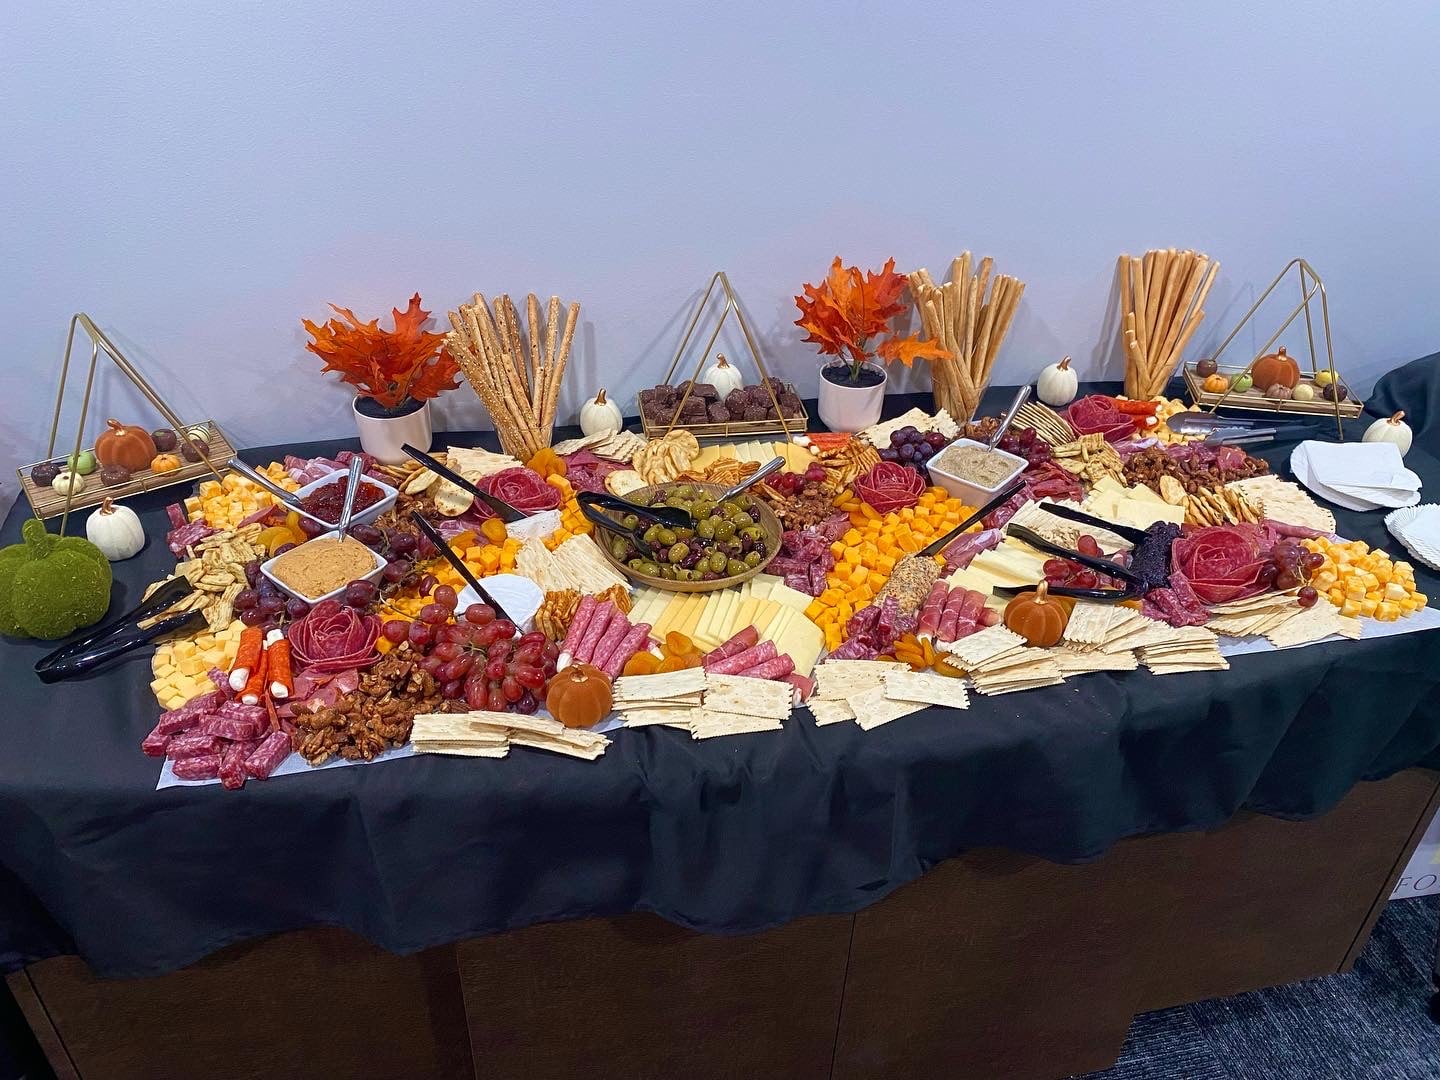 South Bend Catering by The Cellar: Charcuterie of meats and cheeses and breads